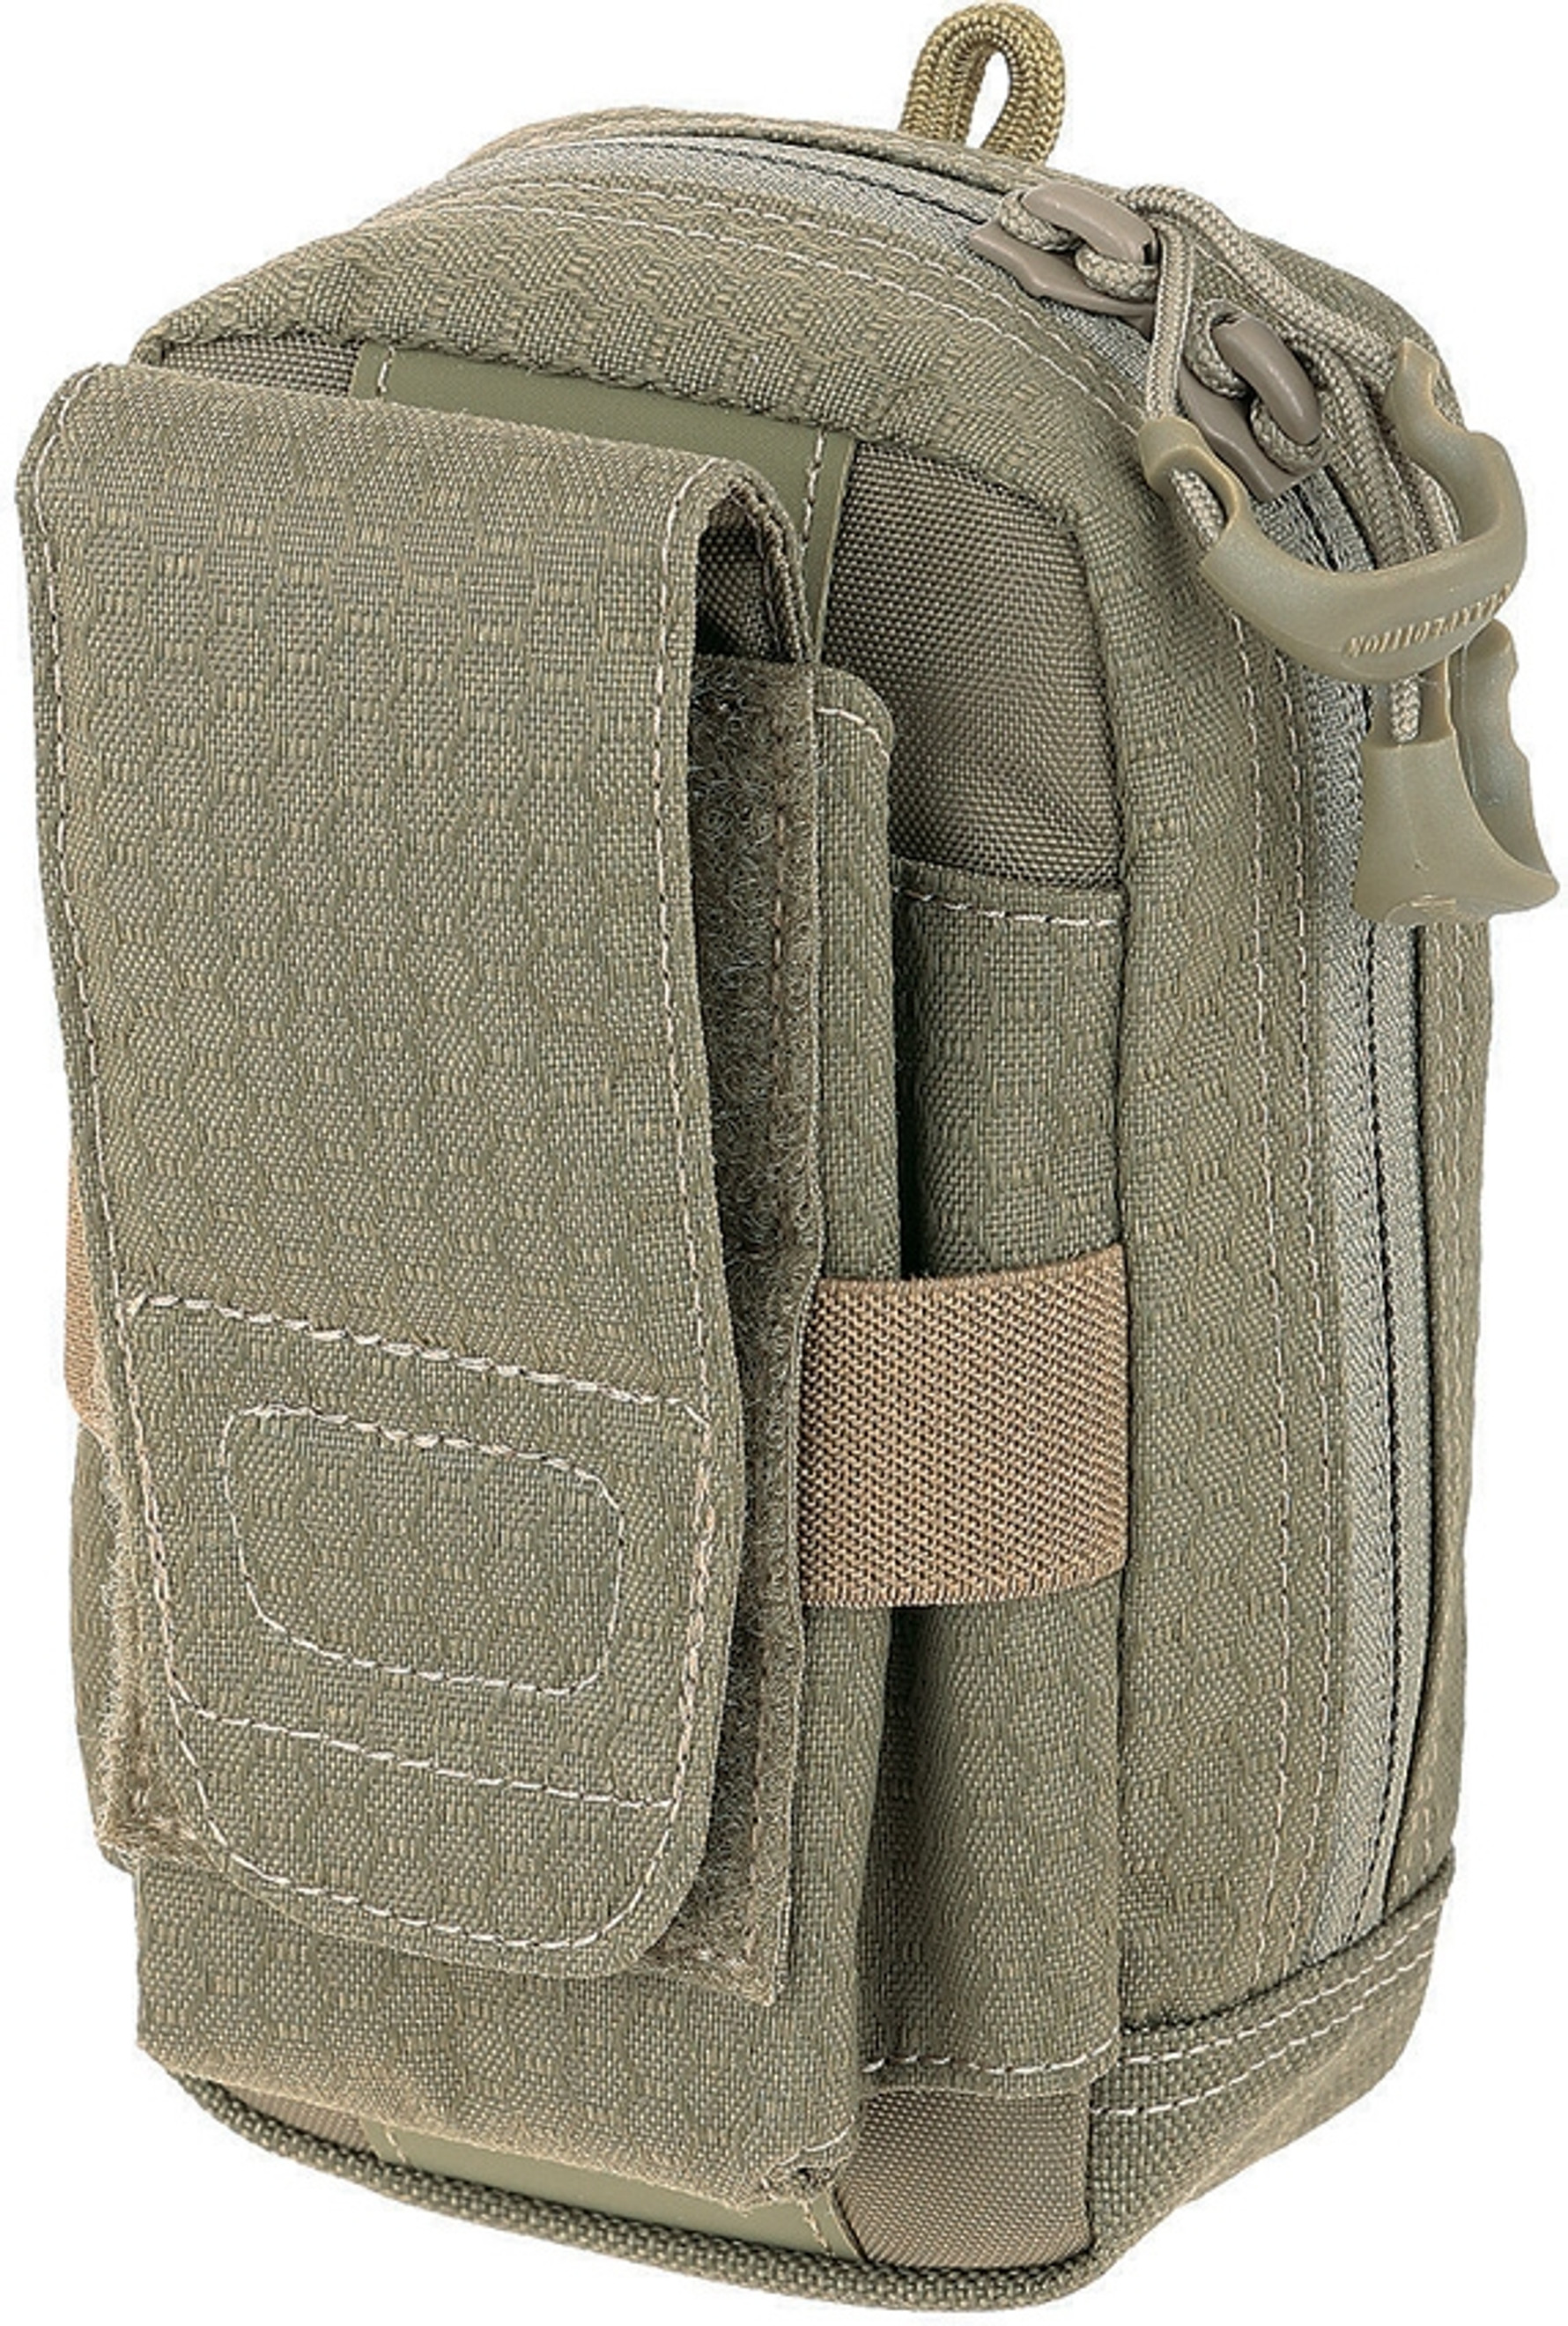 AGR PUP Phone Utility Pouch TN